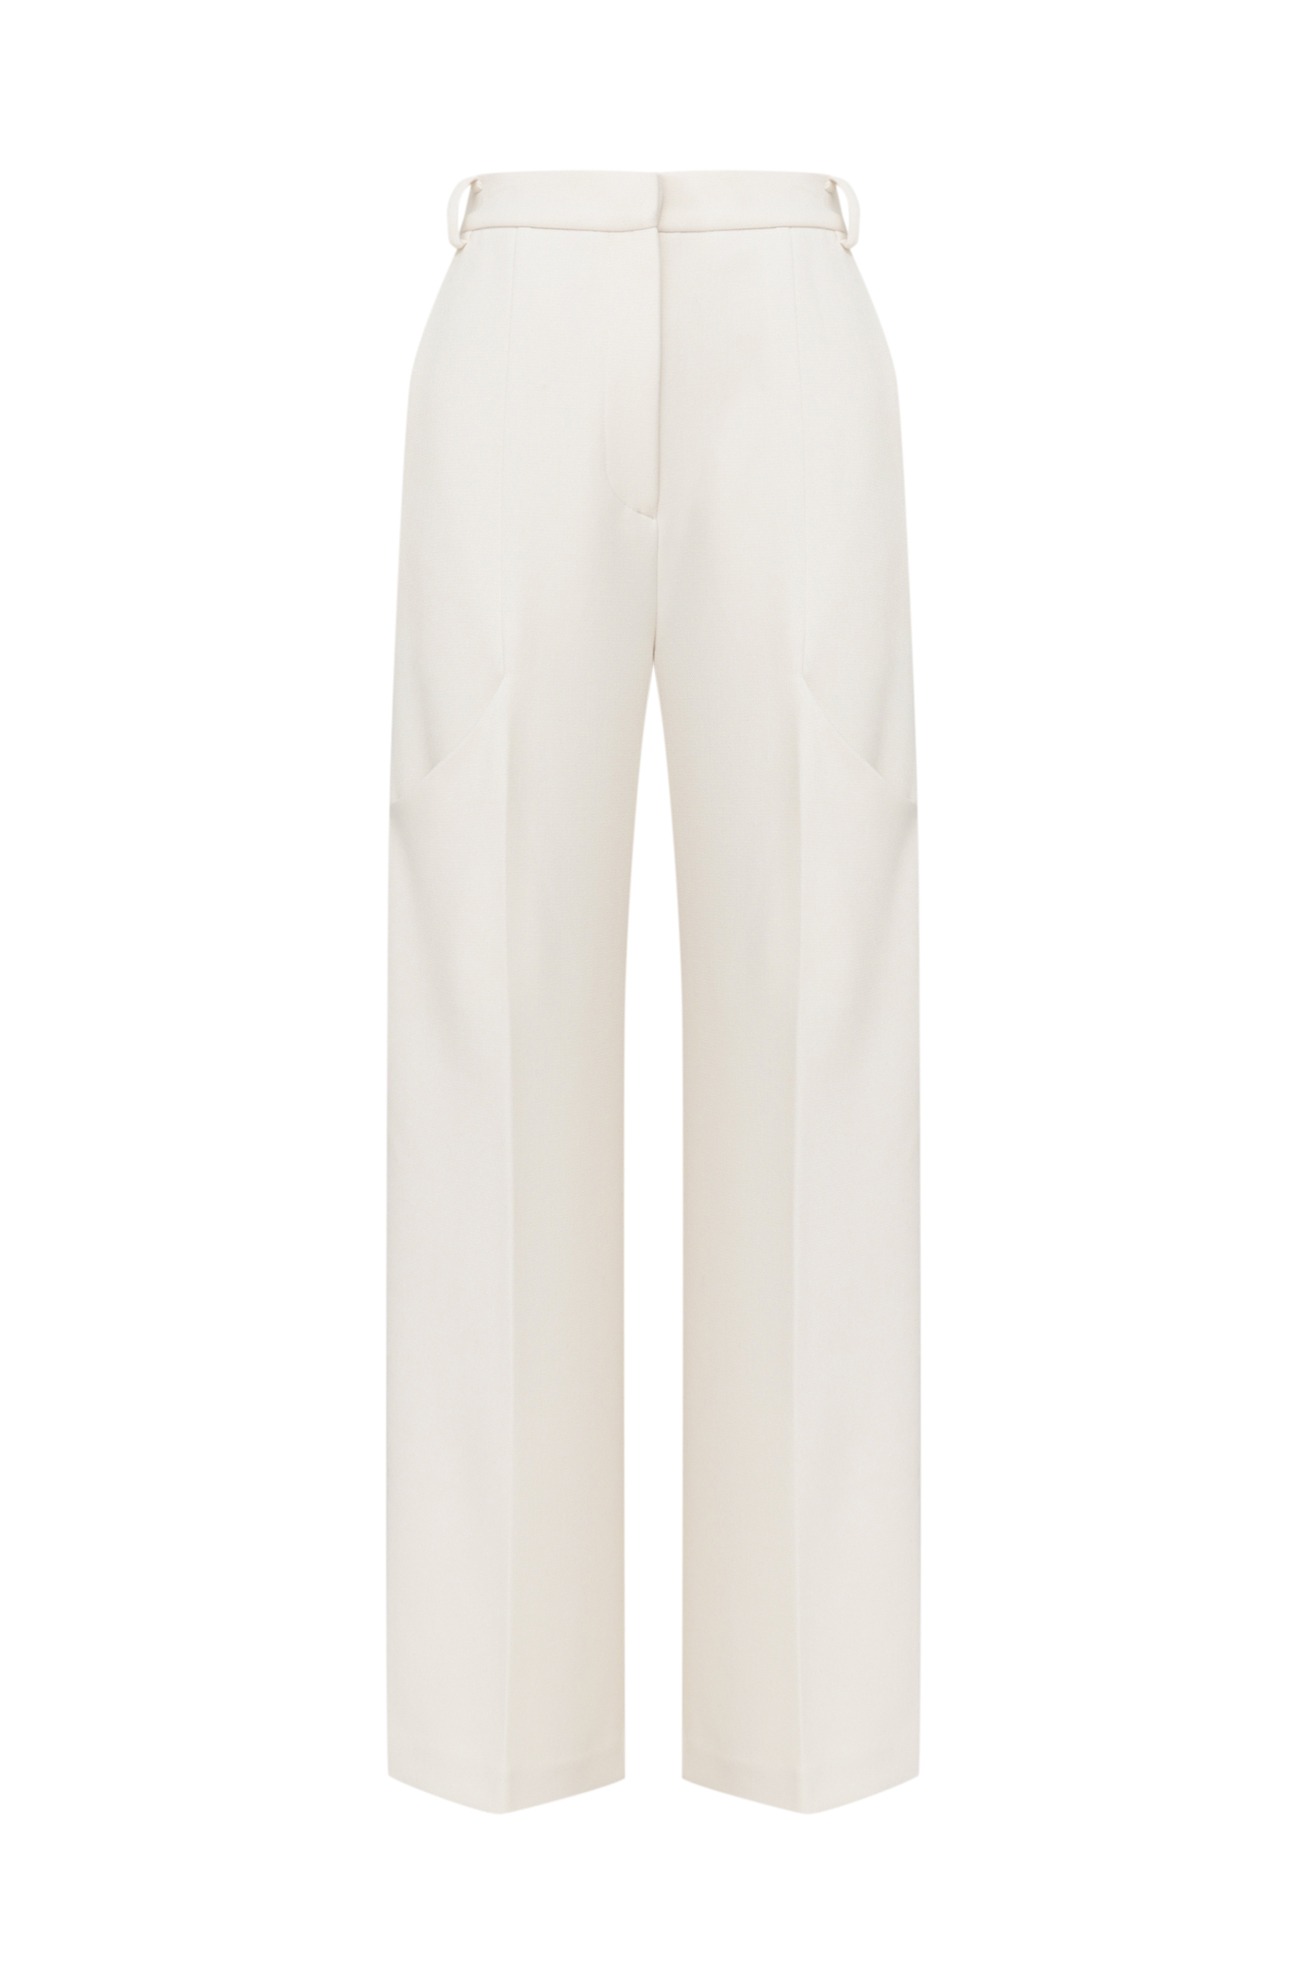 Winter Staright Cut Trousers